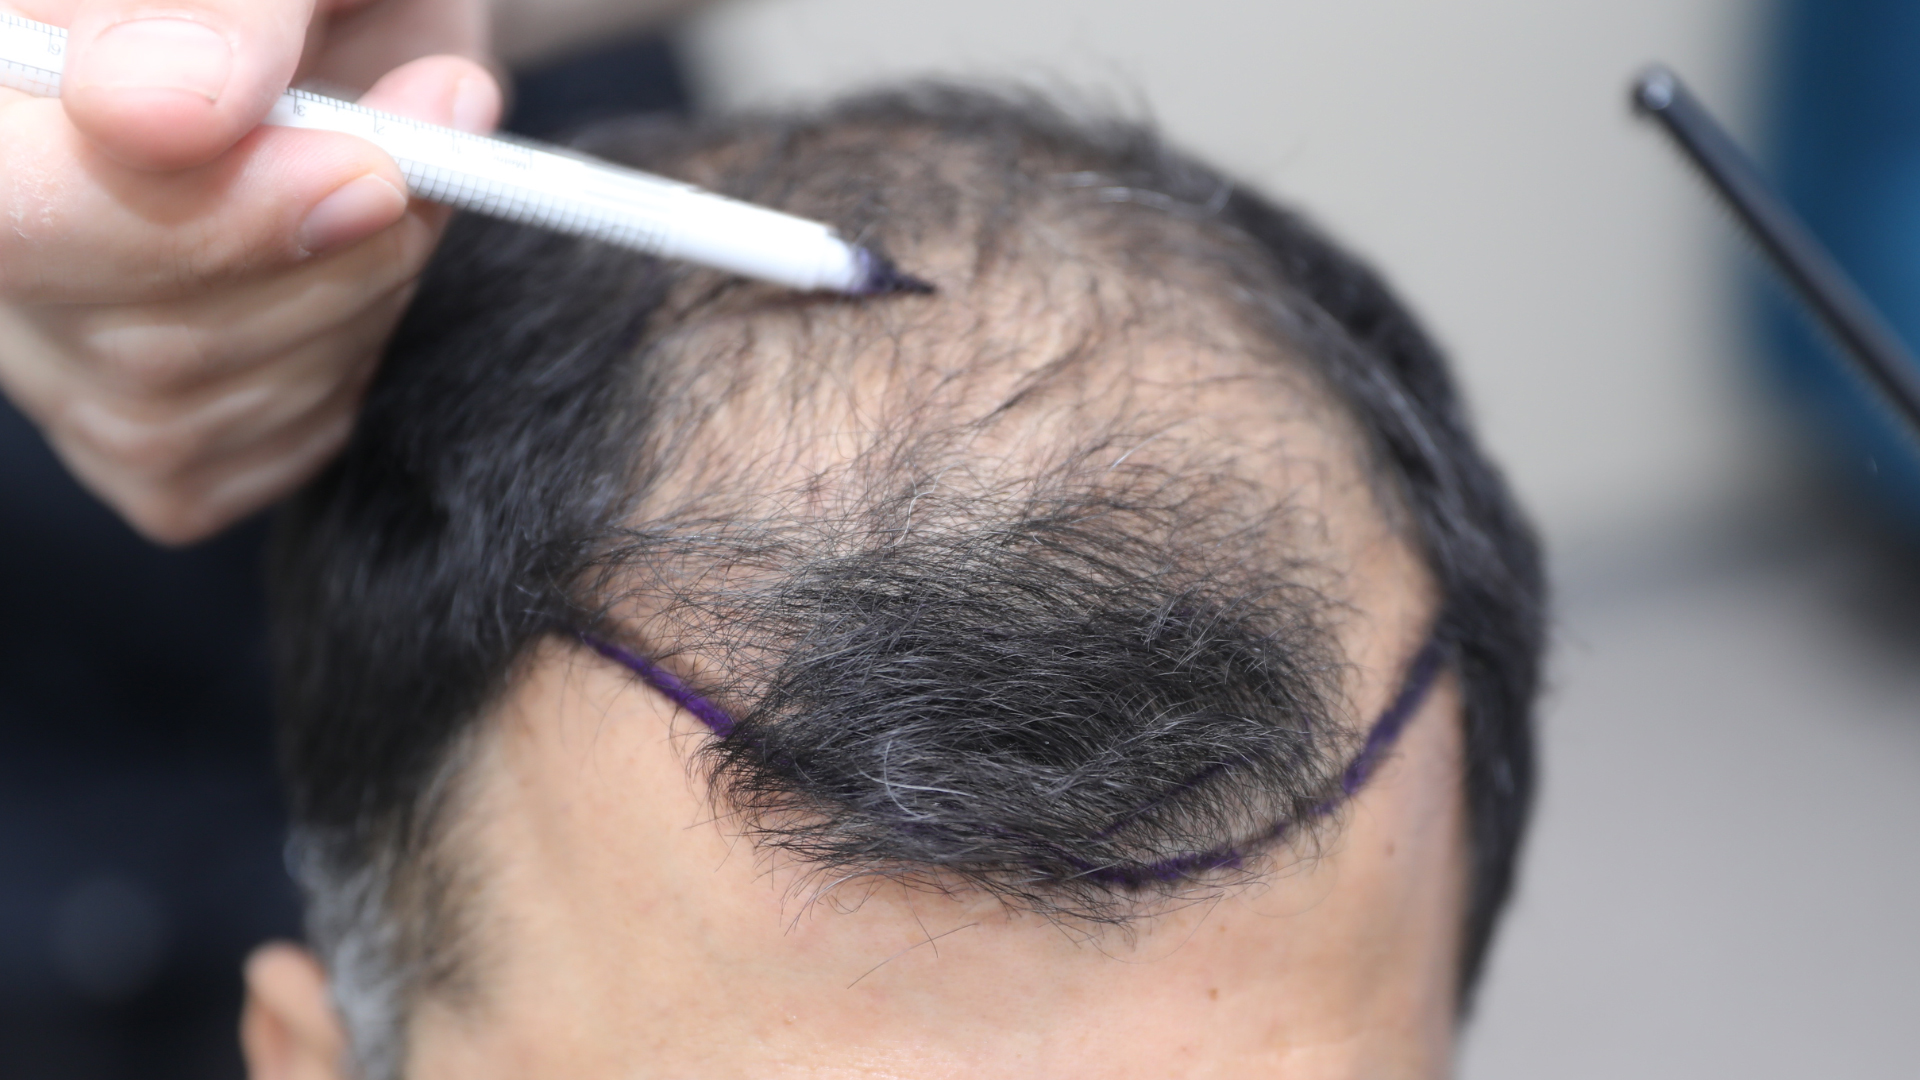 Hair transplant prices: how are they determined?